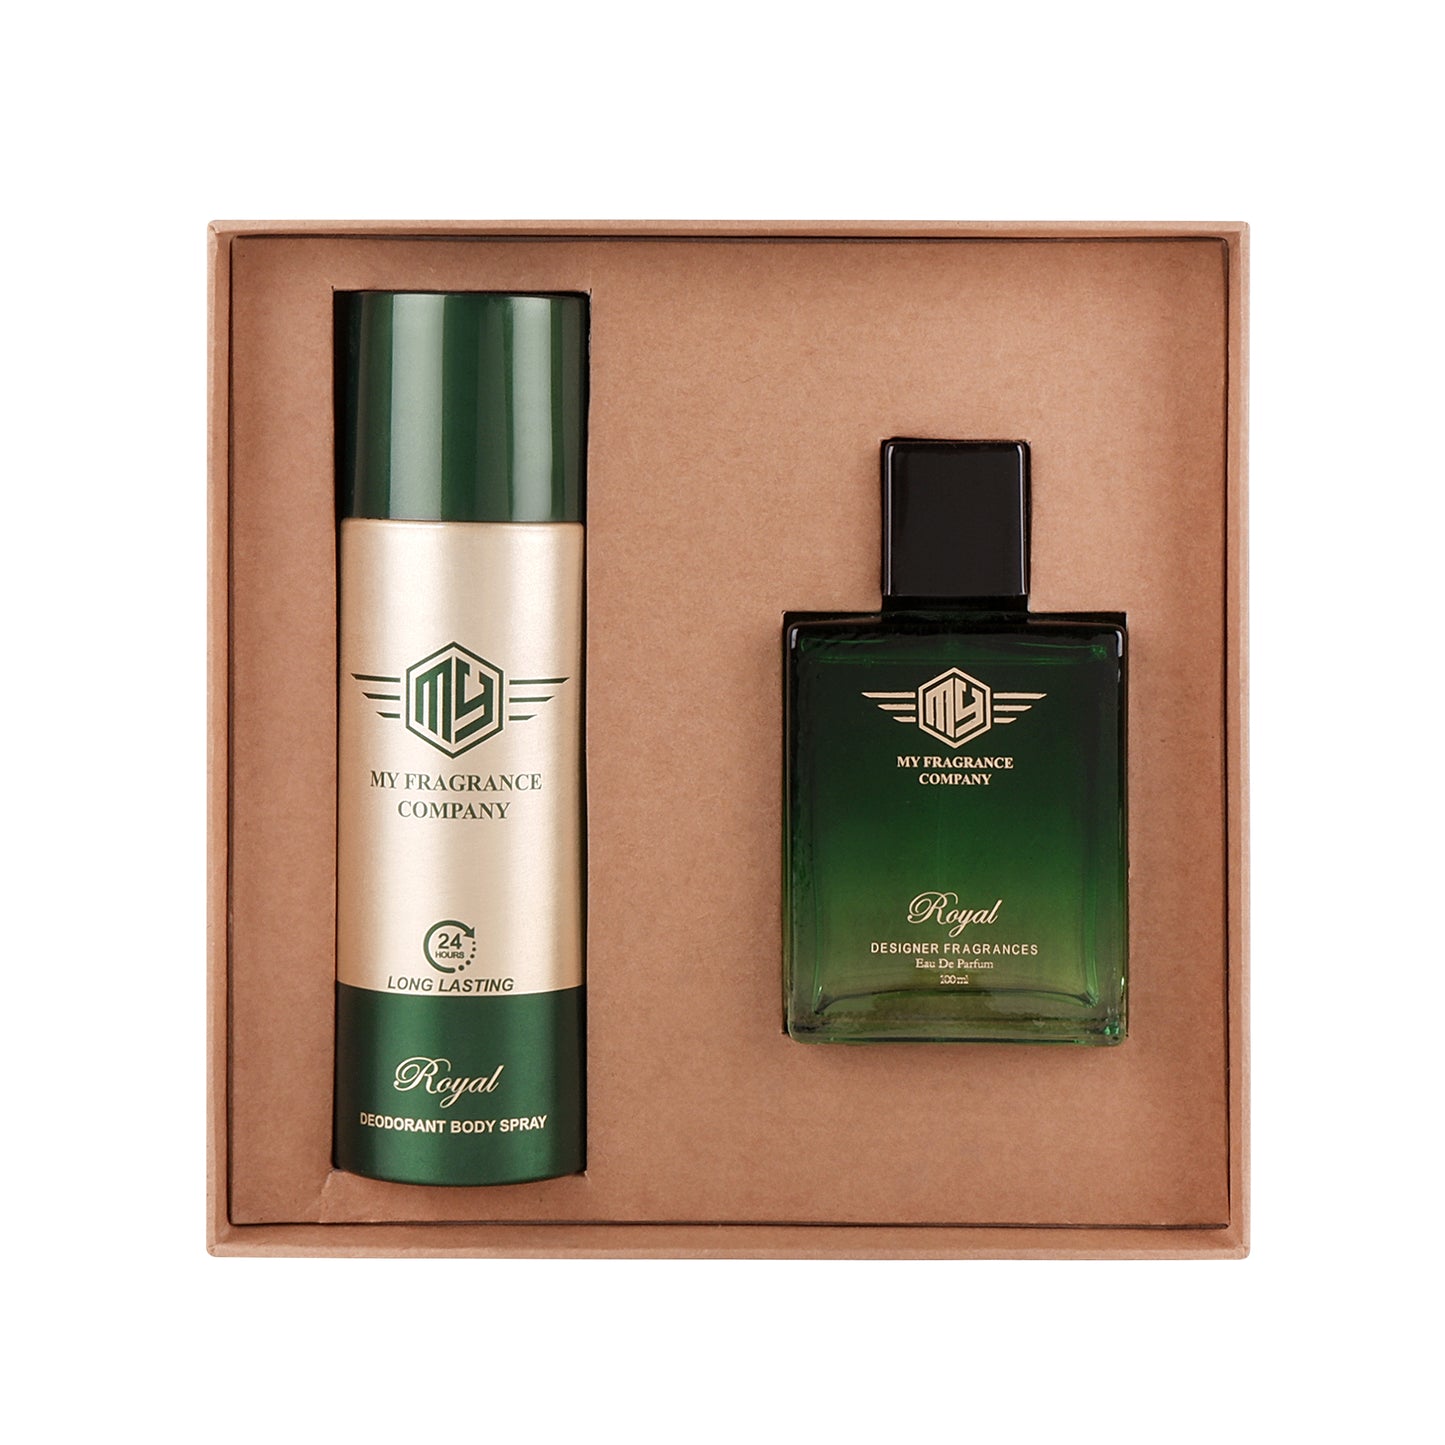 Handcrafted Royal Elite Fragrance EDP Perfume 100ml and Premium Deodorant| (2 Items in the one set)